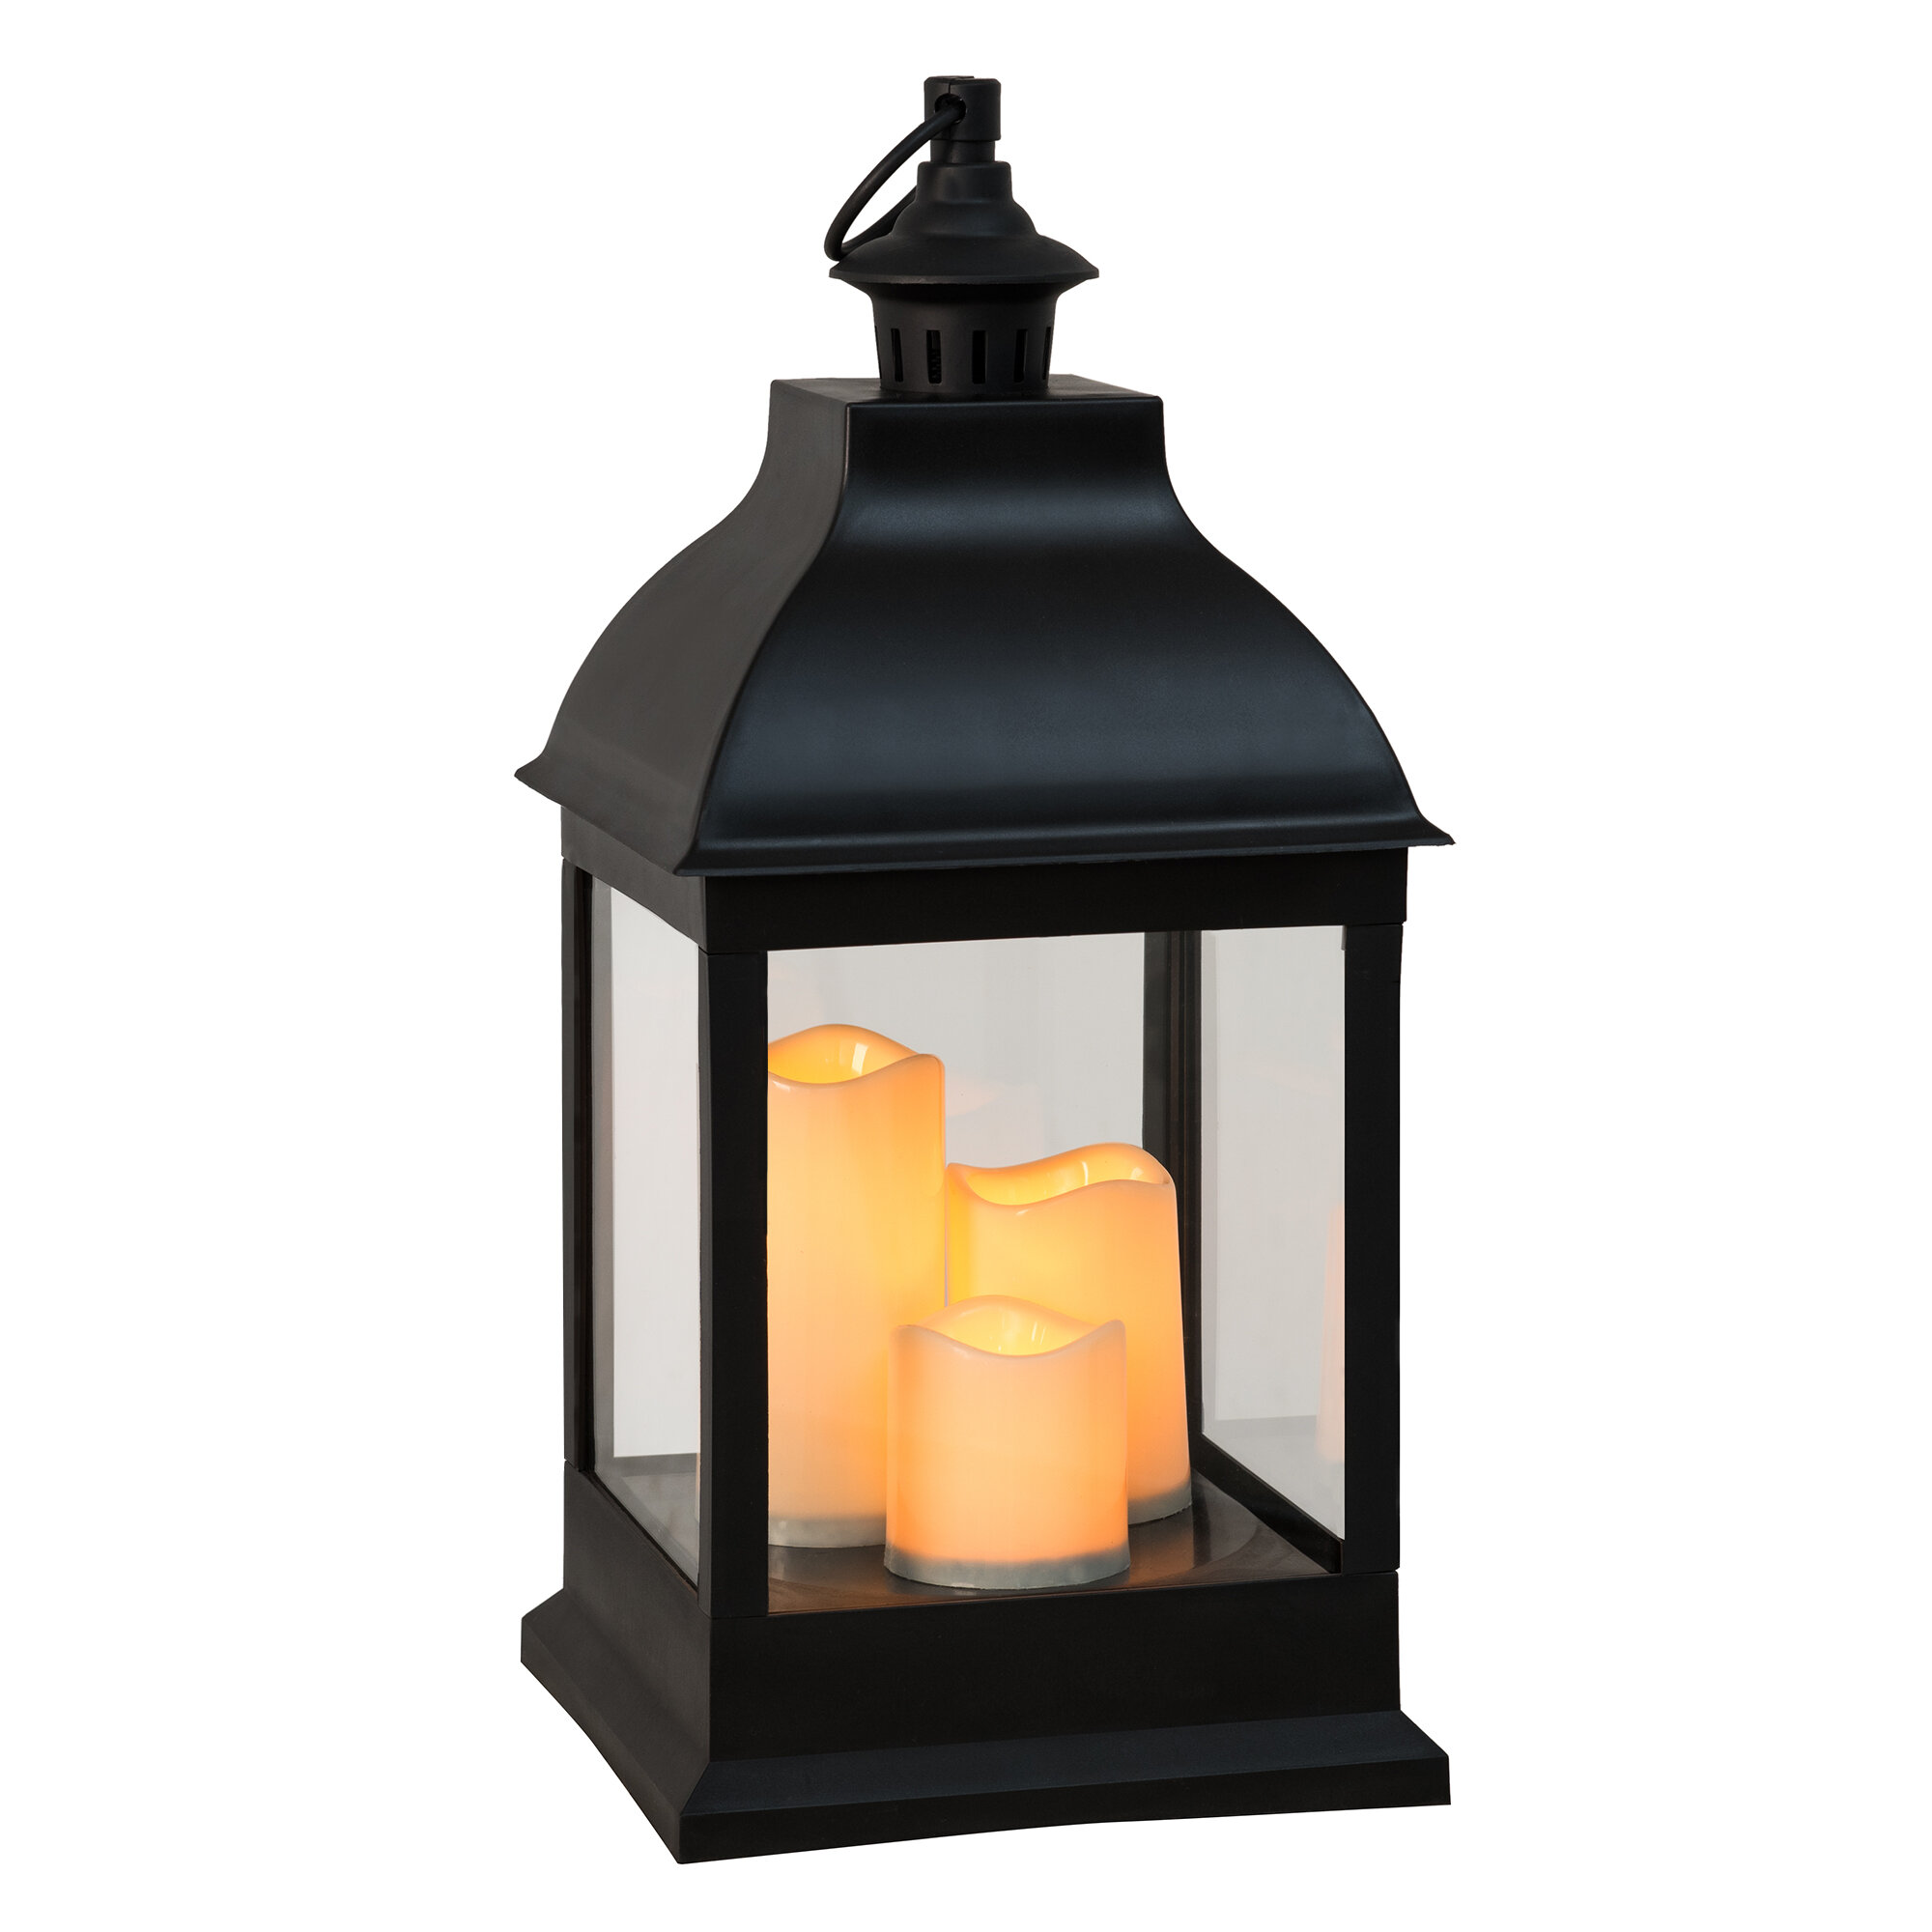 Top 5 Best Camping Candle Lanterns For Your Next Hike!